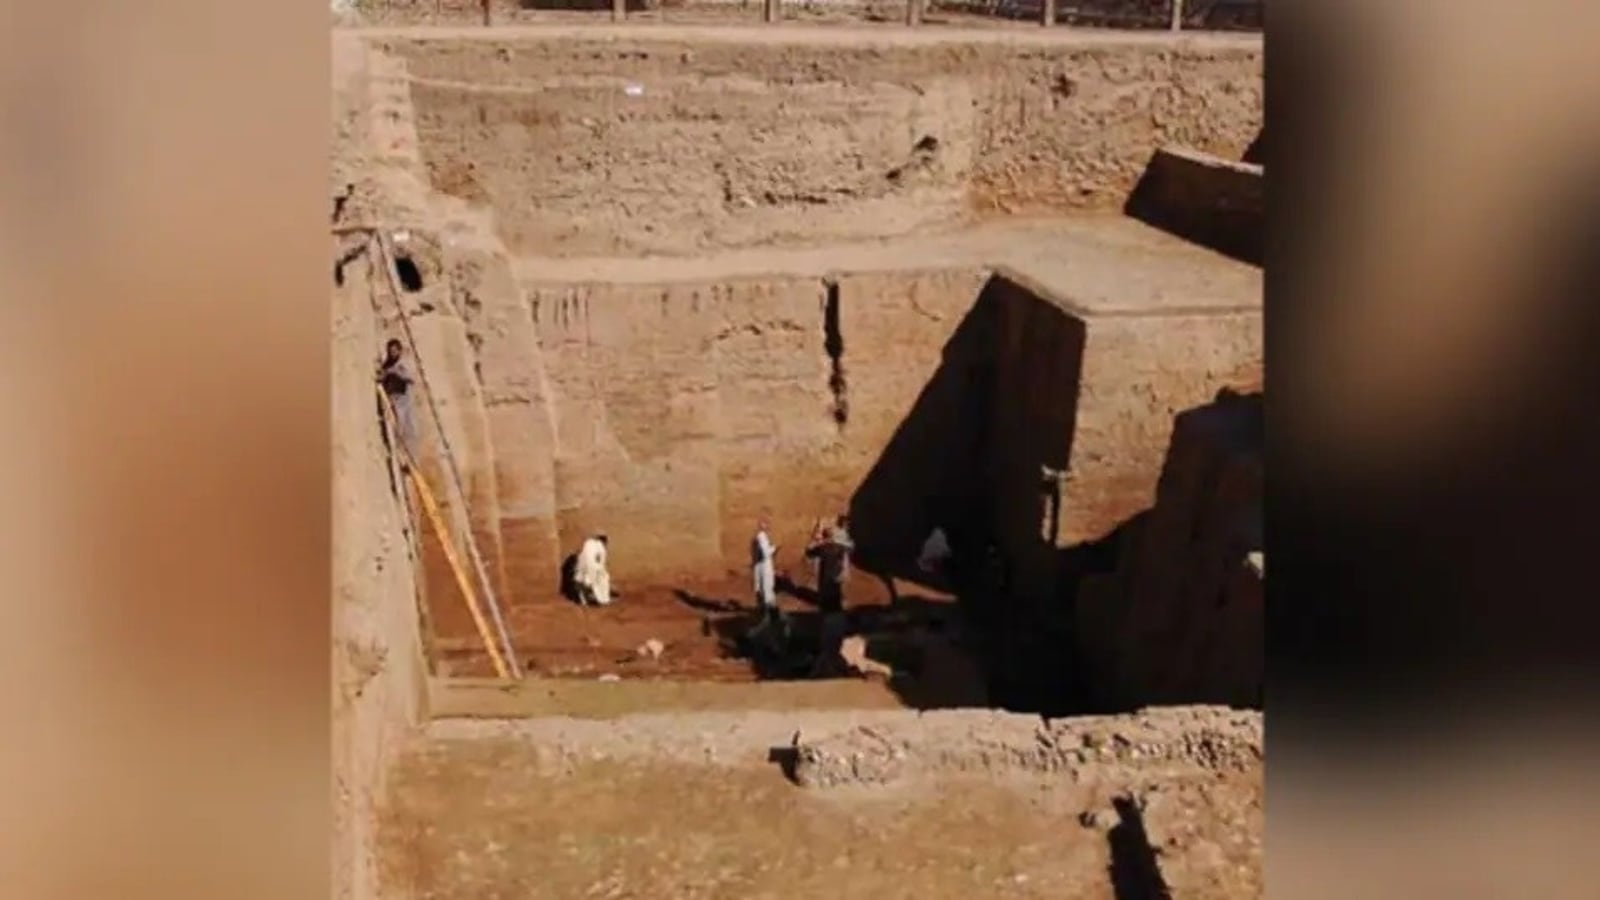 2,300-year-old temple of Buddhist period discovered in Pakistan | World News